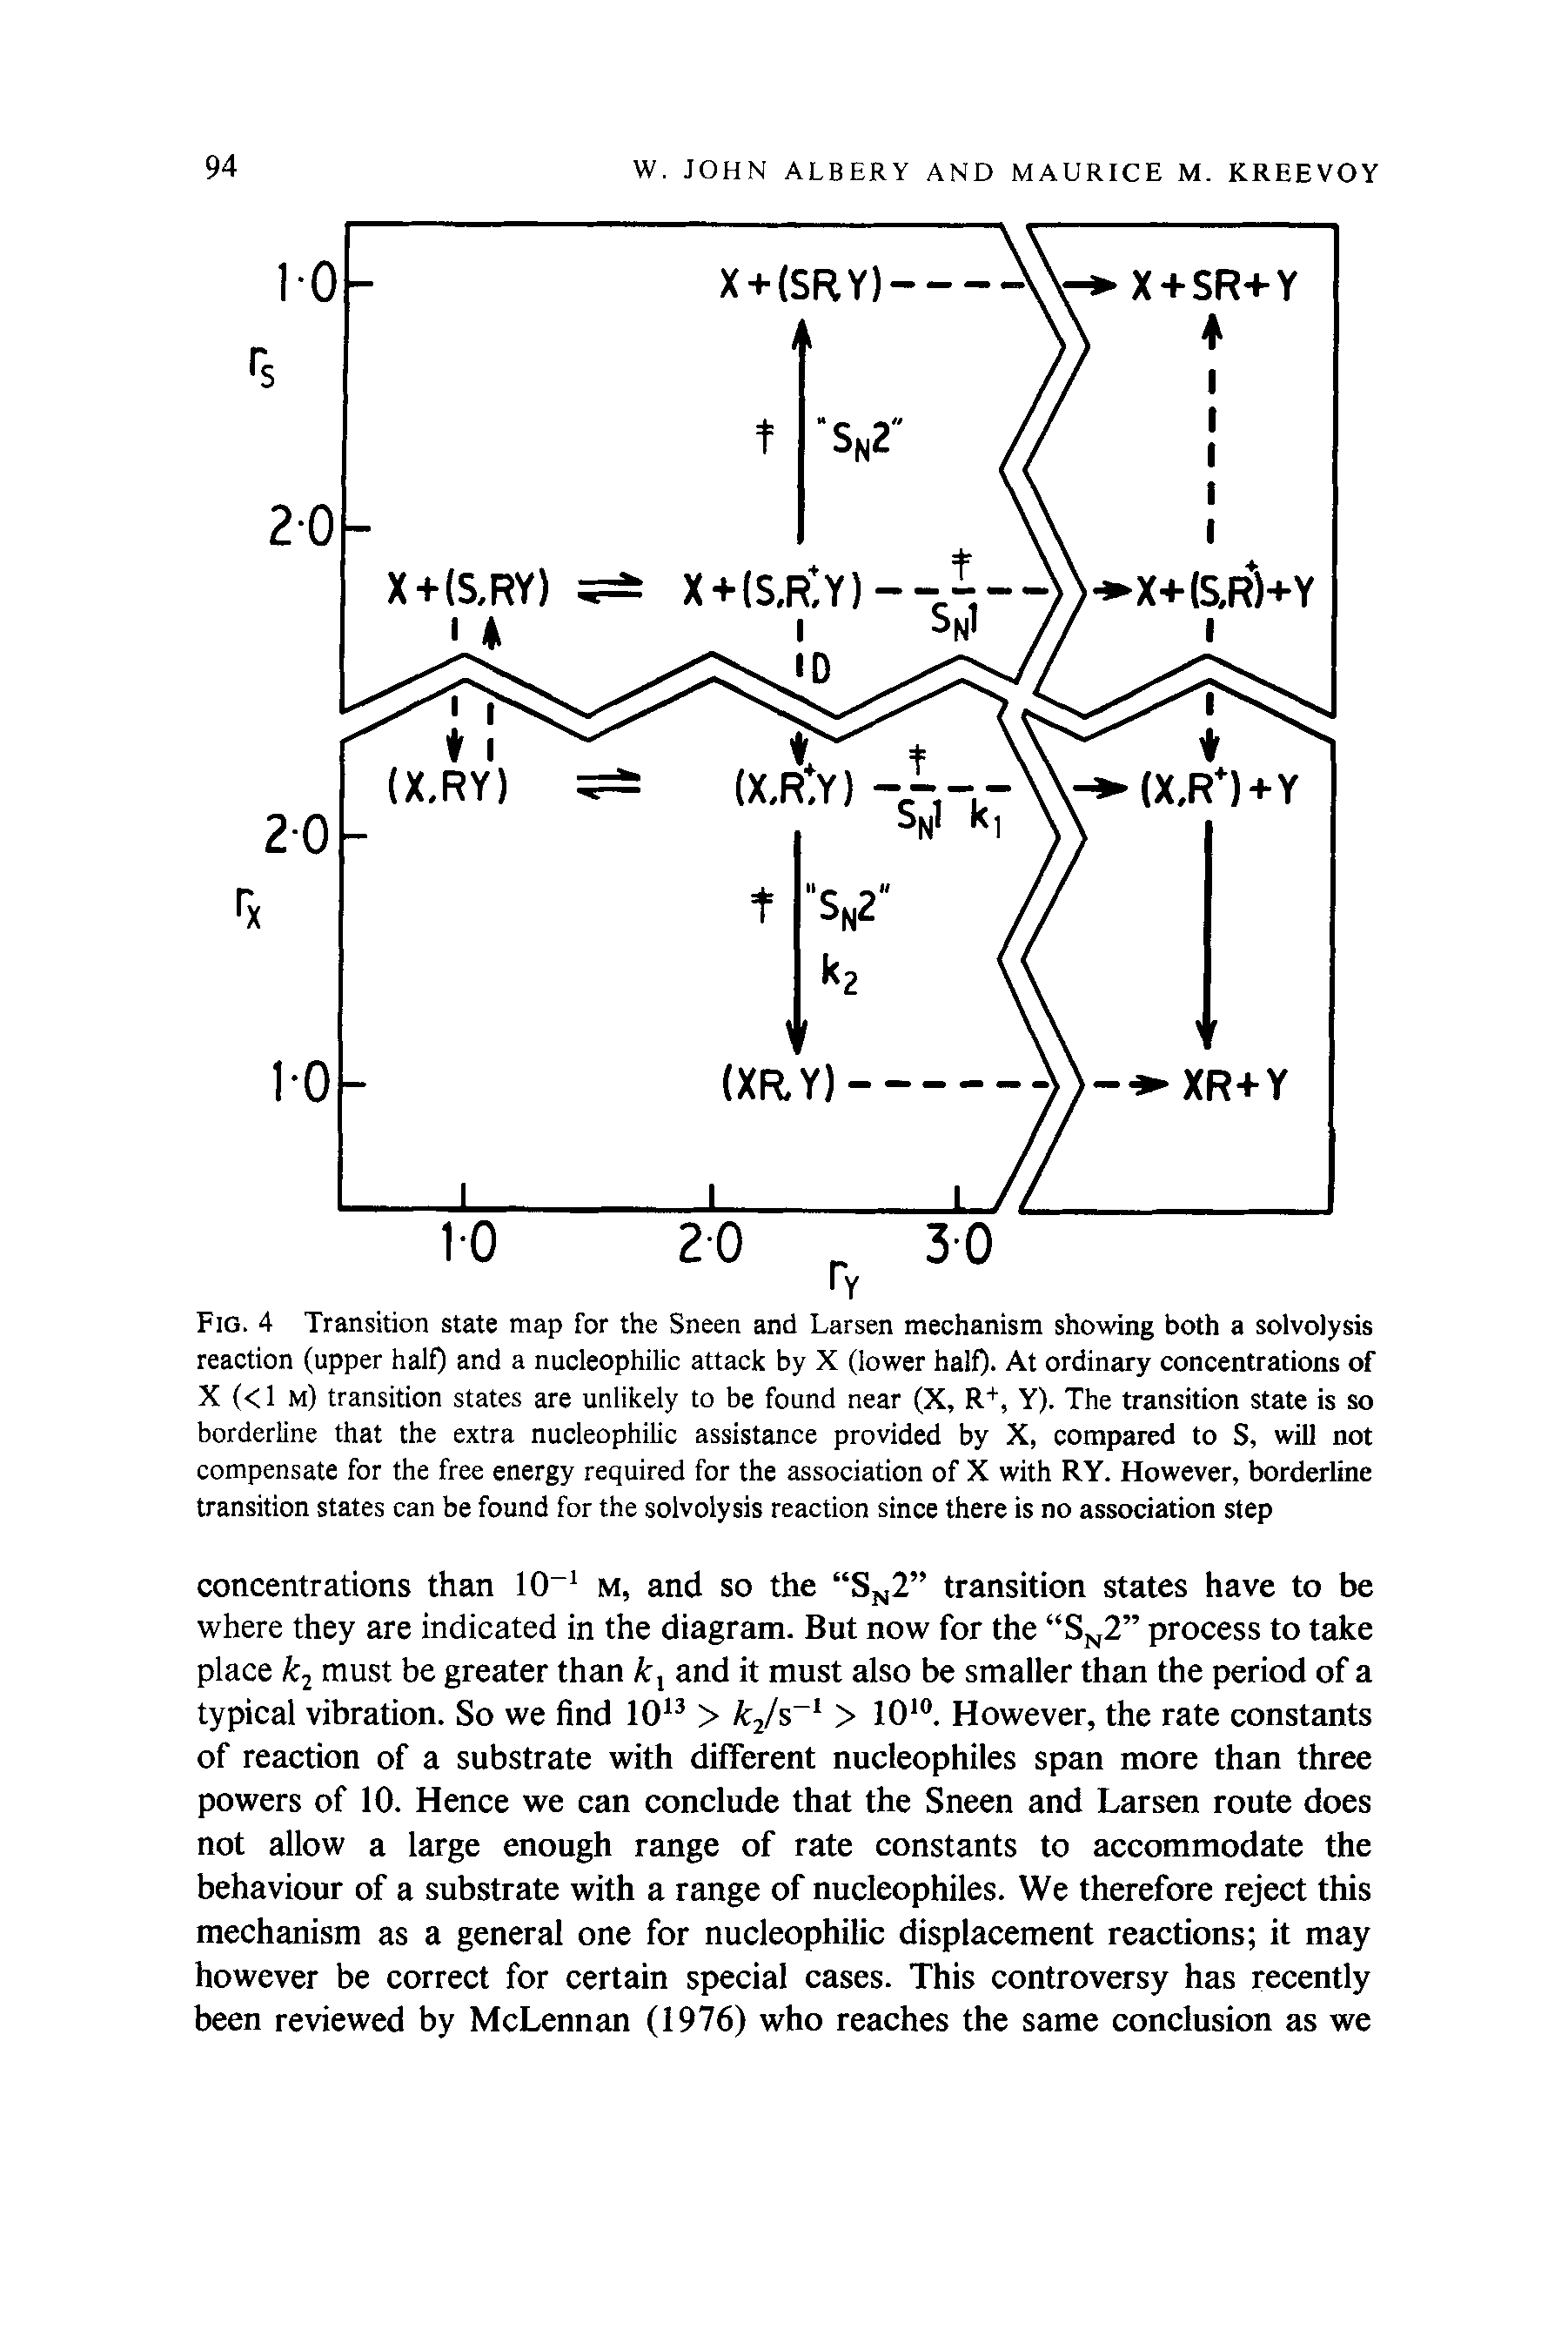 Fig. 4 Transition state map for the Sneen and Larsen mechanism showing both a solvolysis reaction (upper half) and a nucleophilic attack by X (lower half). At ordinary concentrations of X (< 1 m) transition states are unlikely to be found near (X, R+, Y). The transition state is so borderline that the extra nucleophilic assistance provided by X, compared to S, will not compensate for the free energy required for the association of X with RY. However, borderline transition states can be found for the solvolysis reaction since there is no association step...